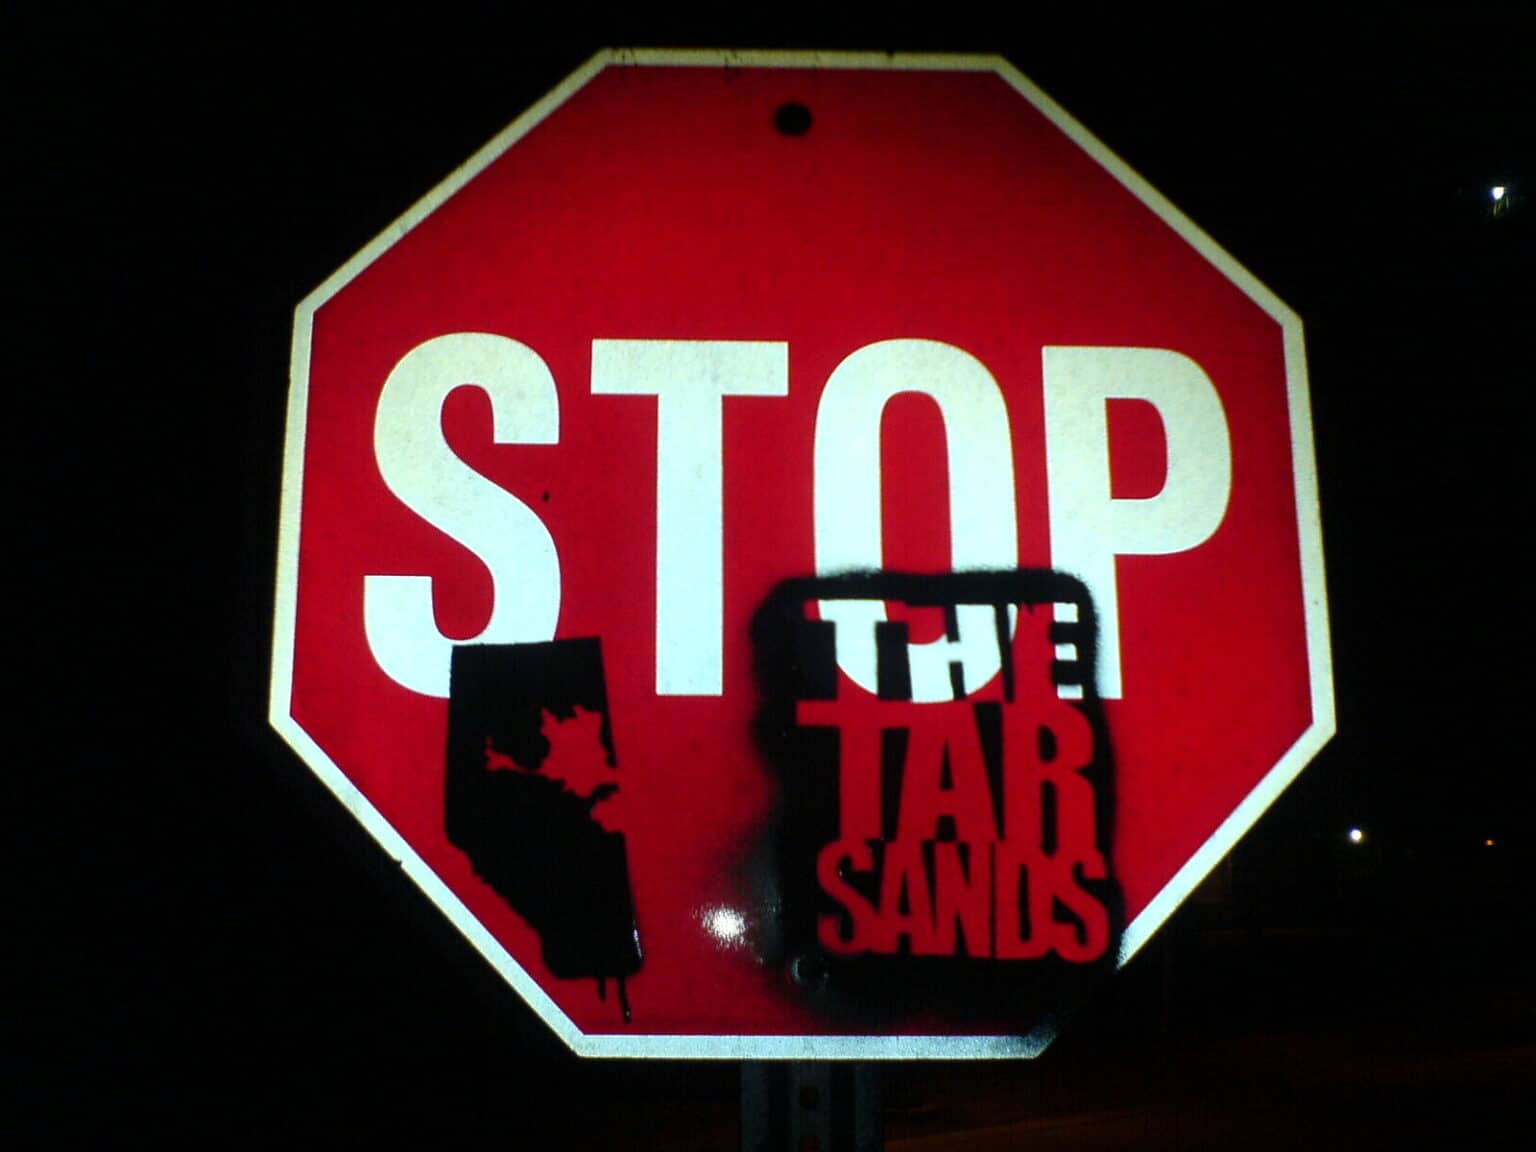 A red and white stop sign with a black painted stencil on its bottom half, so that it now reads "Stop the Tar Sands."